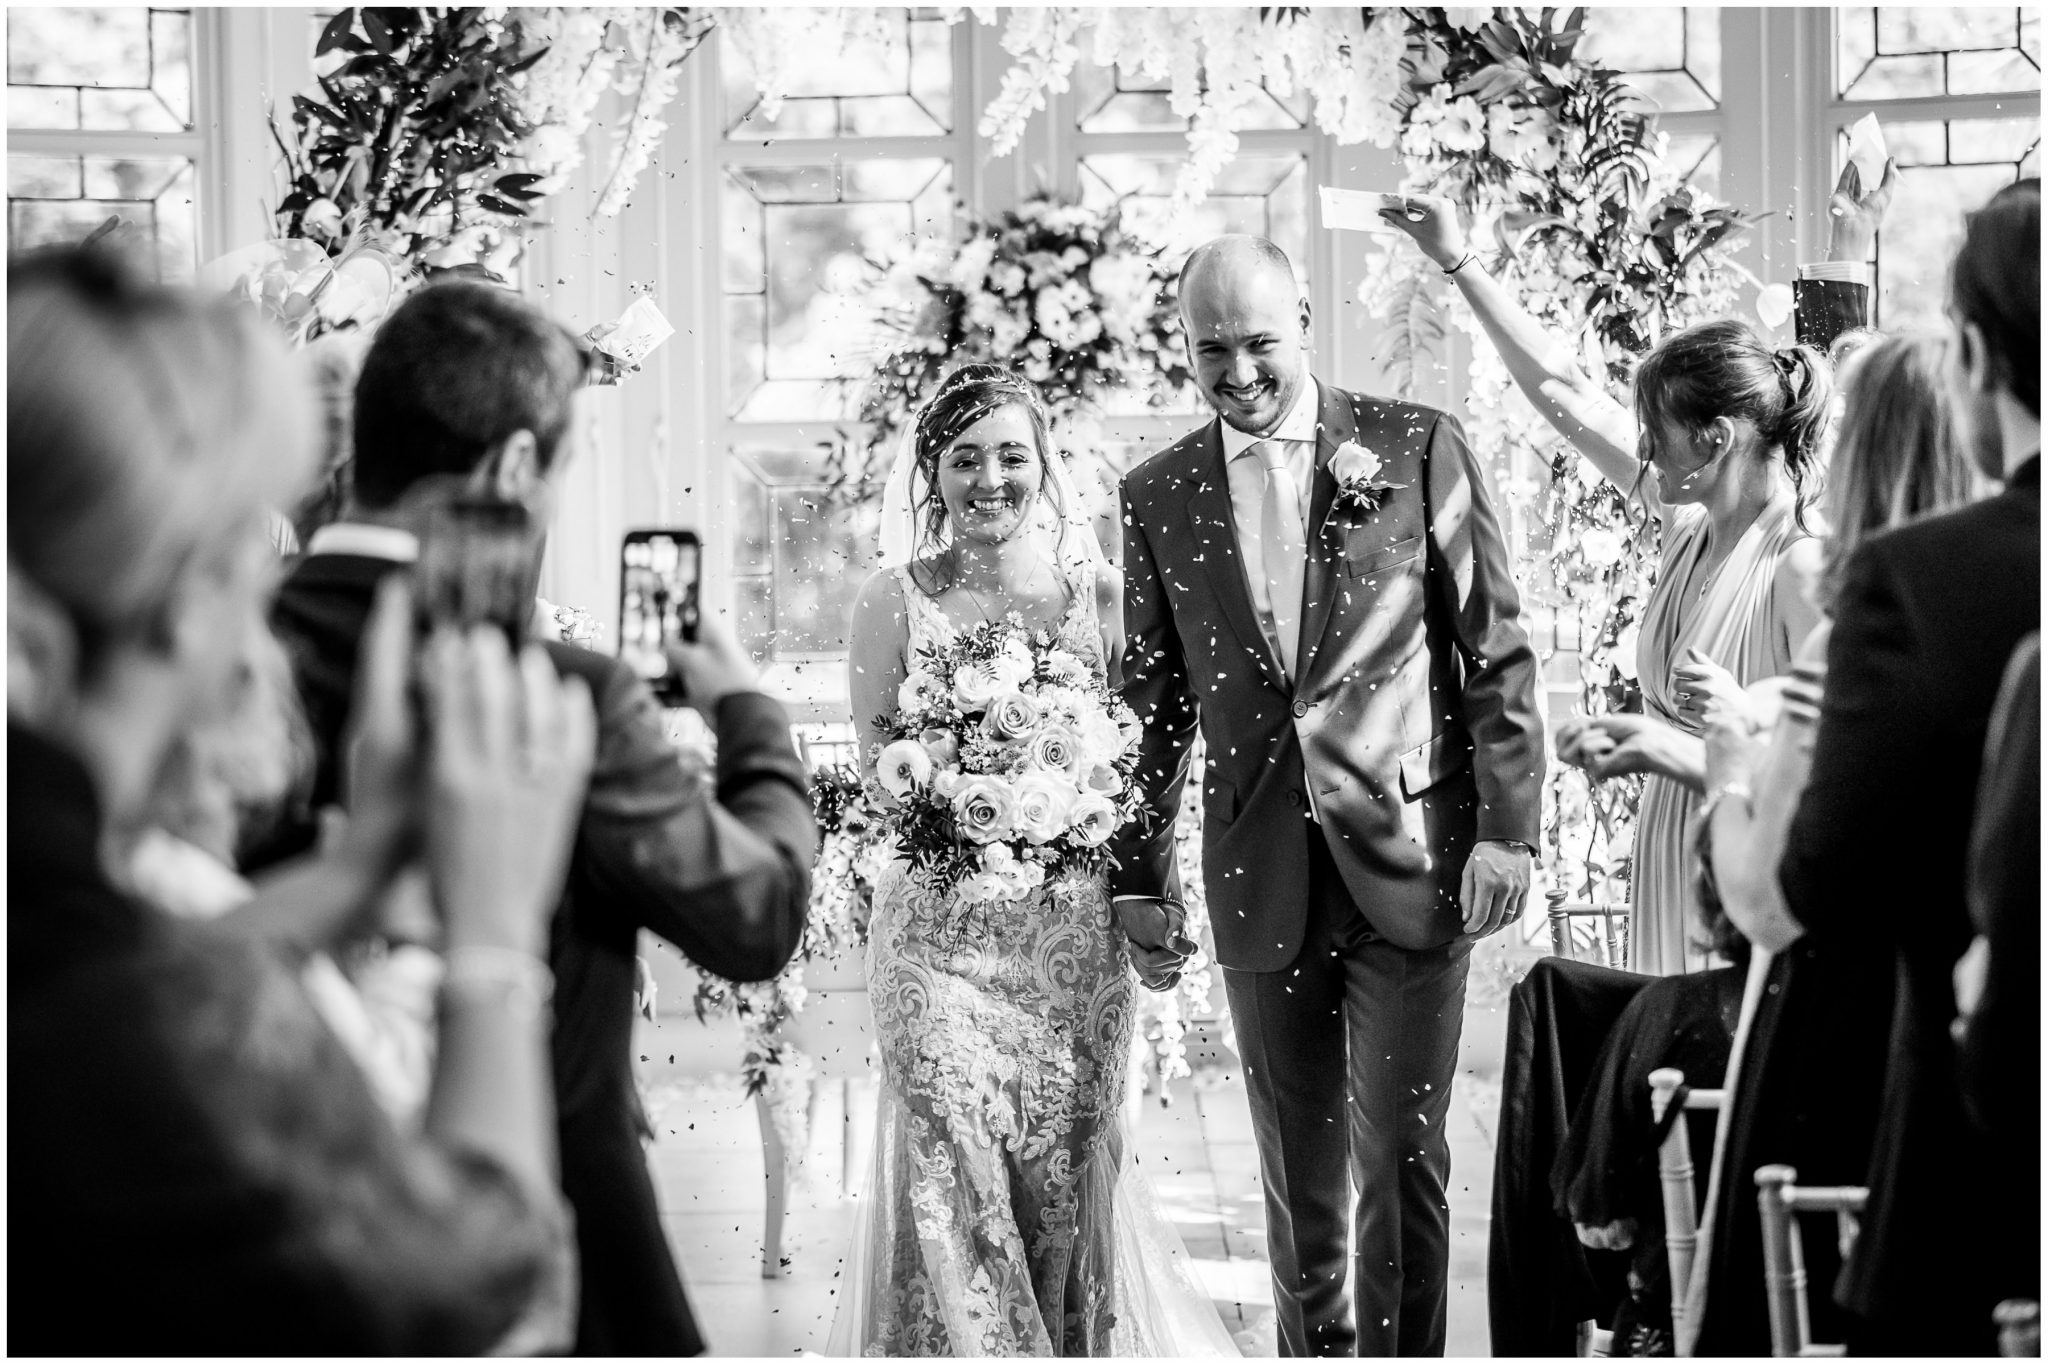 Guests throw confetti as the bride and groom walk back down the aisle